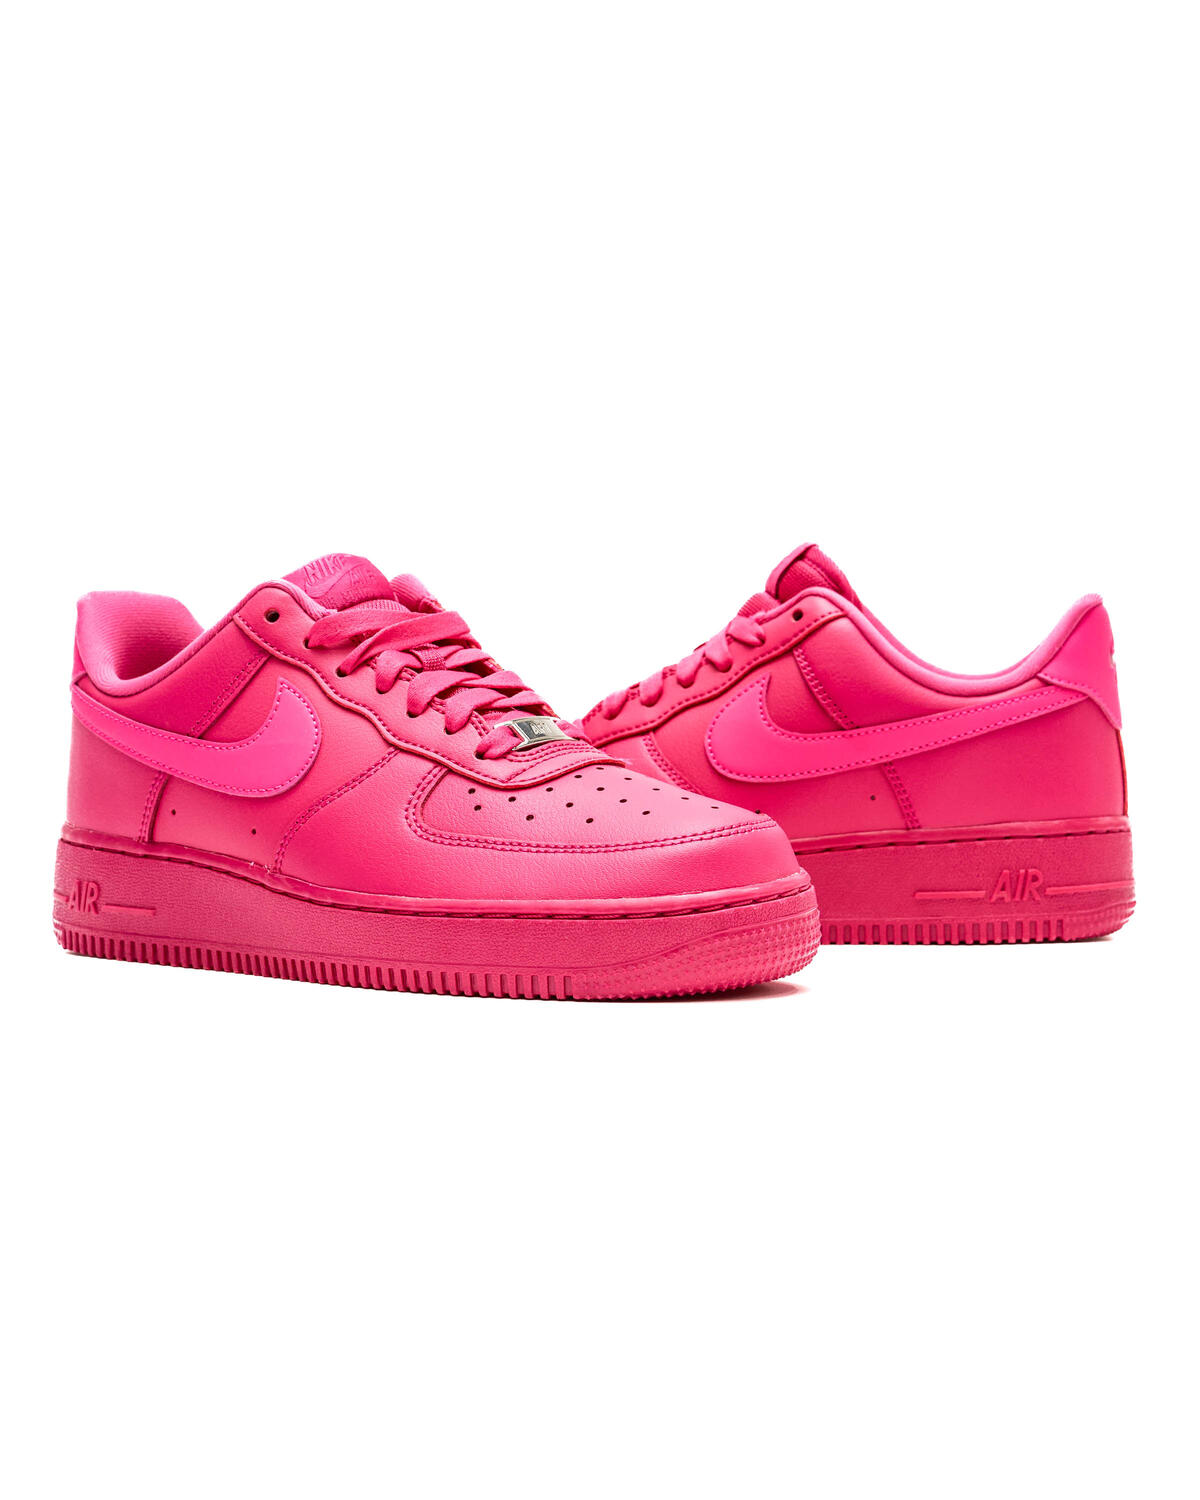 Nike WMNS Air Force 1 Low Fireberry 23cm DD8959-600 - レディースシューズ